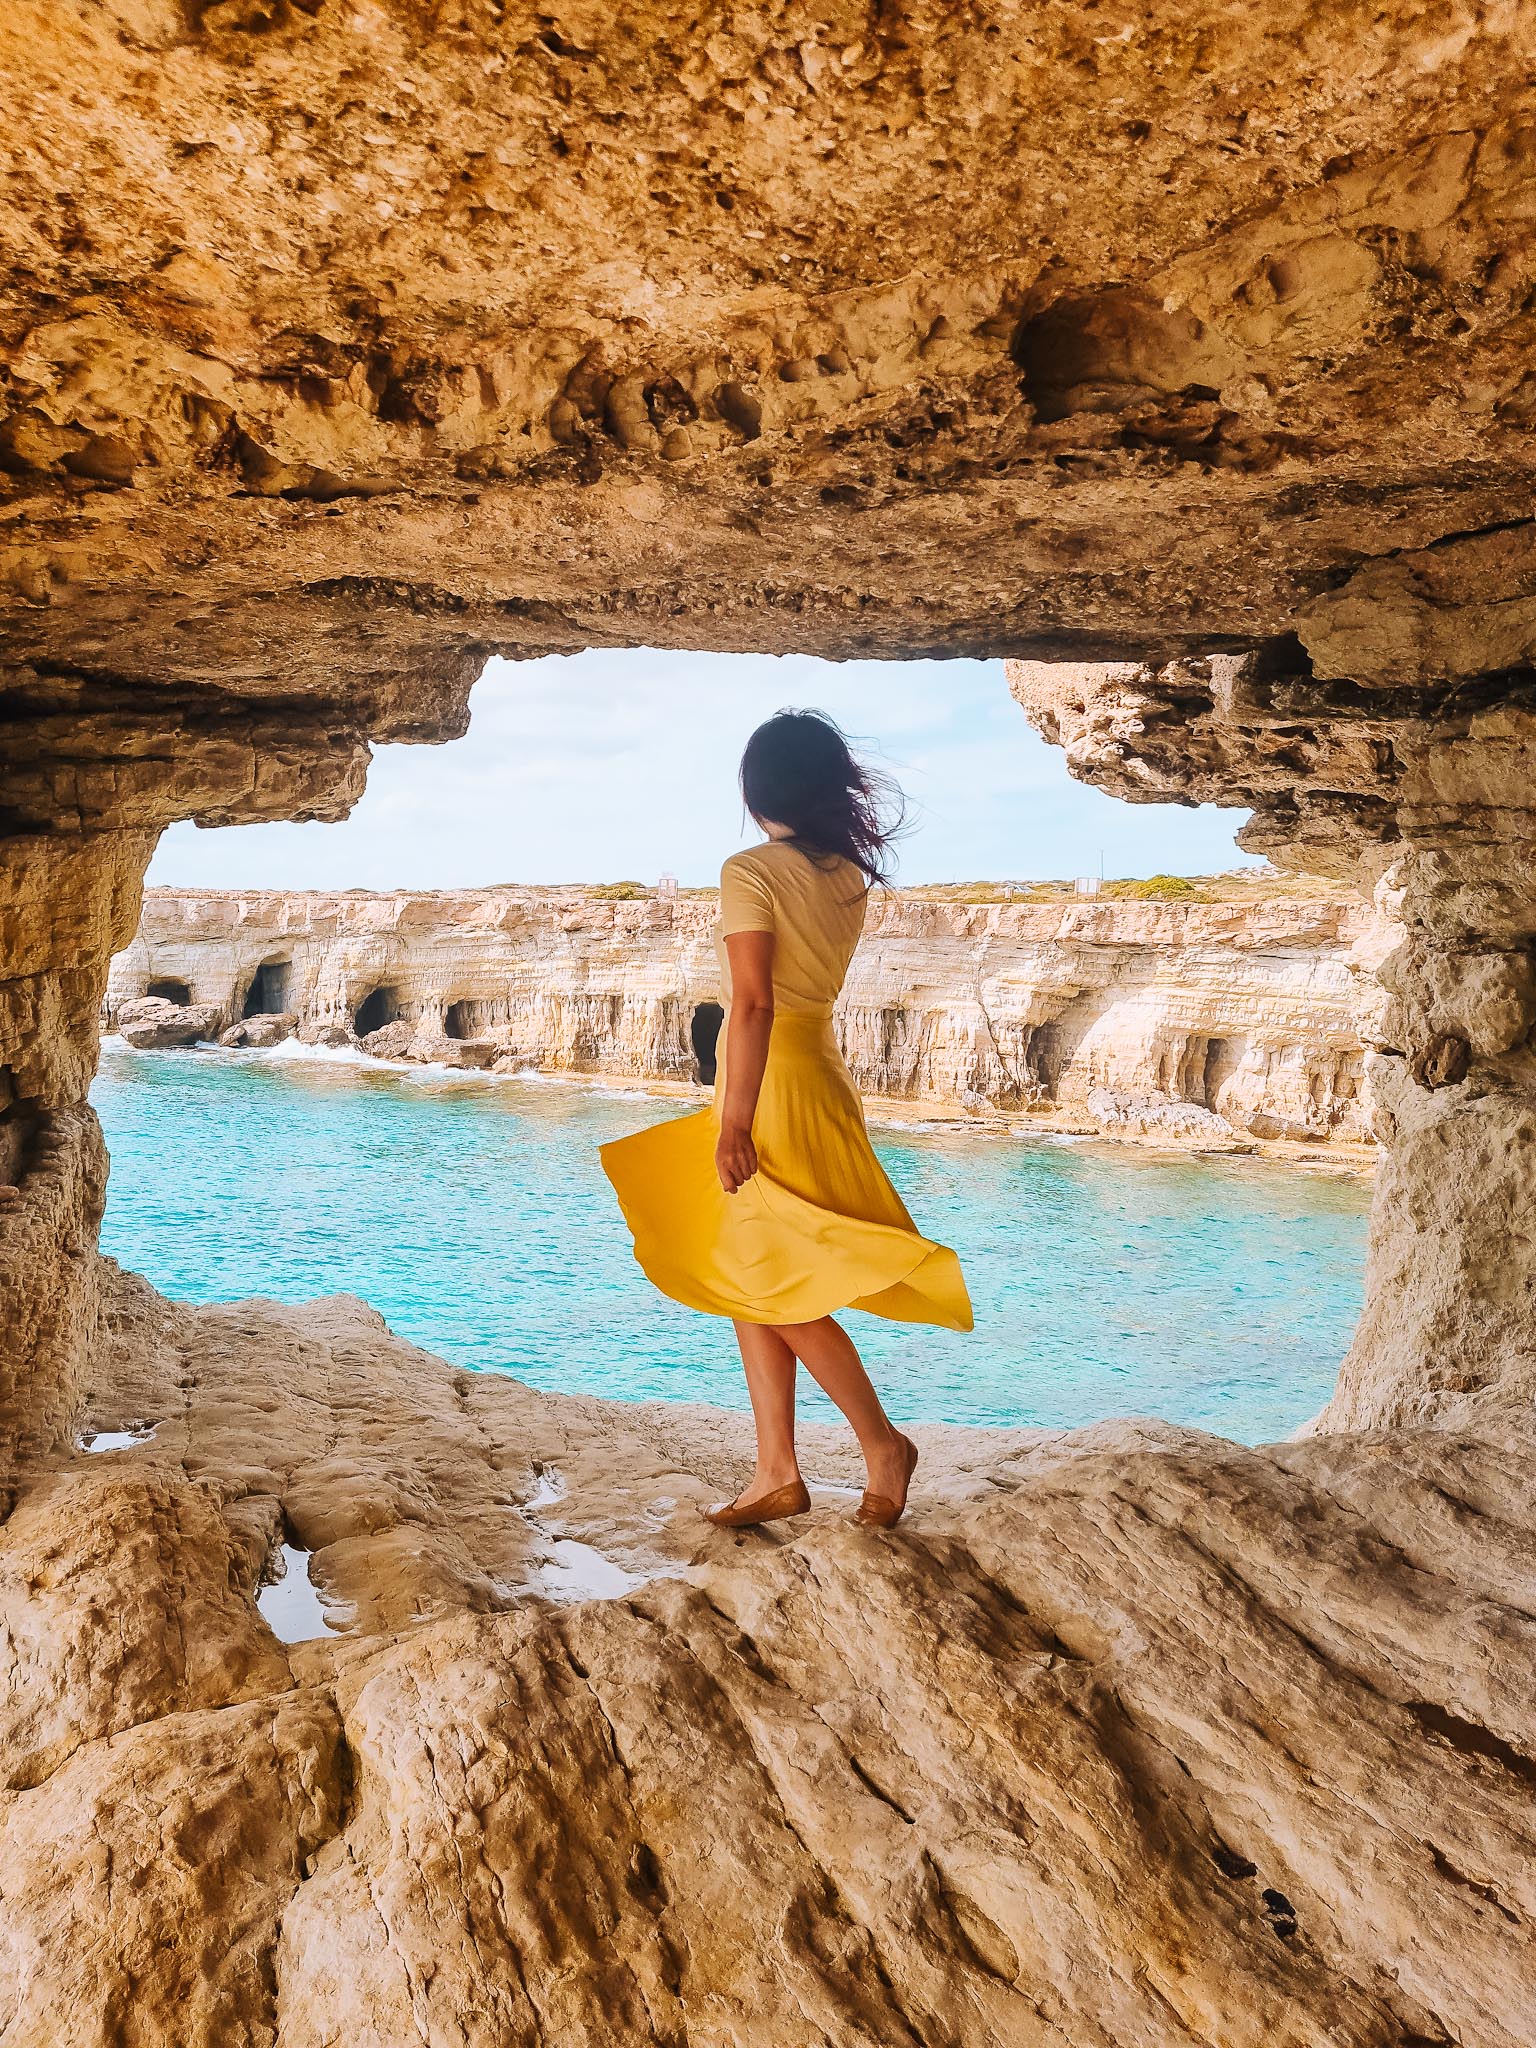 Cyprus sea caves and rock formations in Ayia Napa